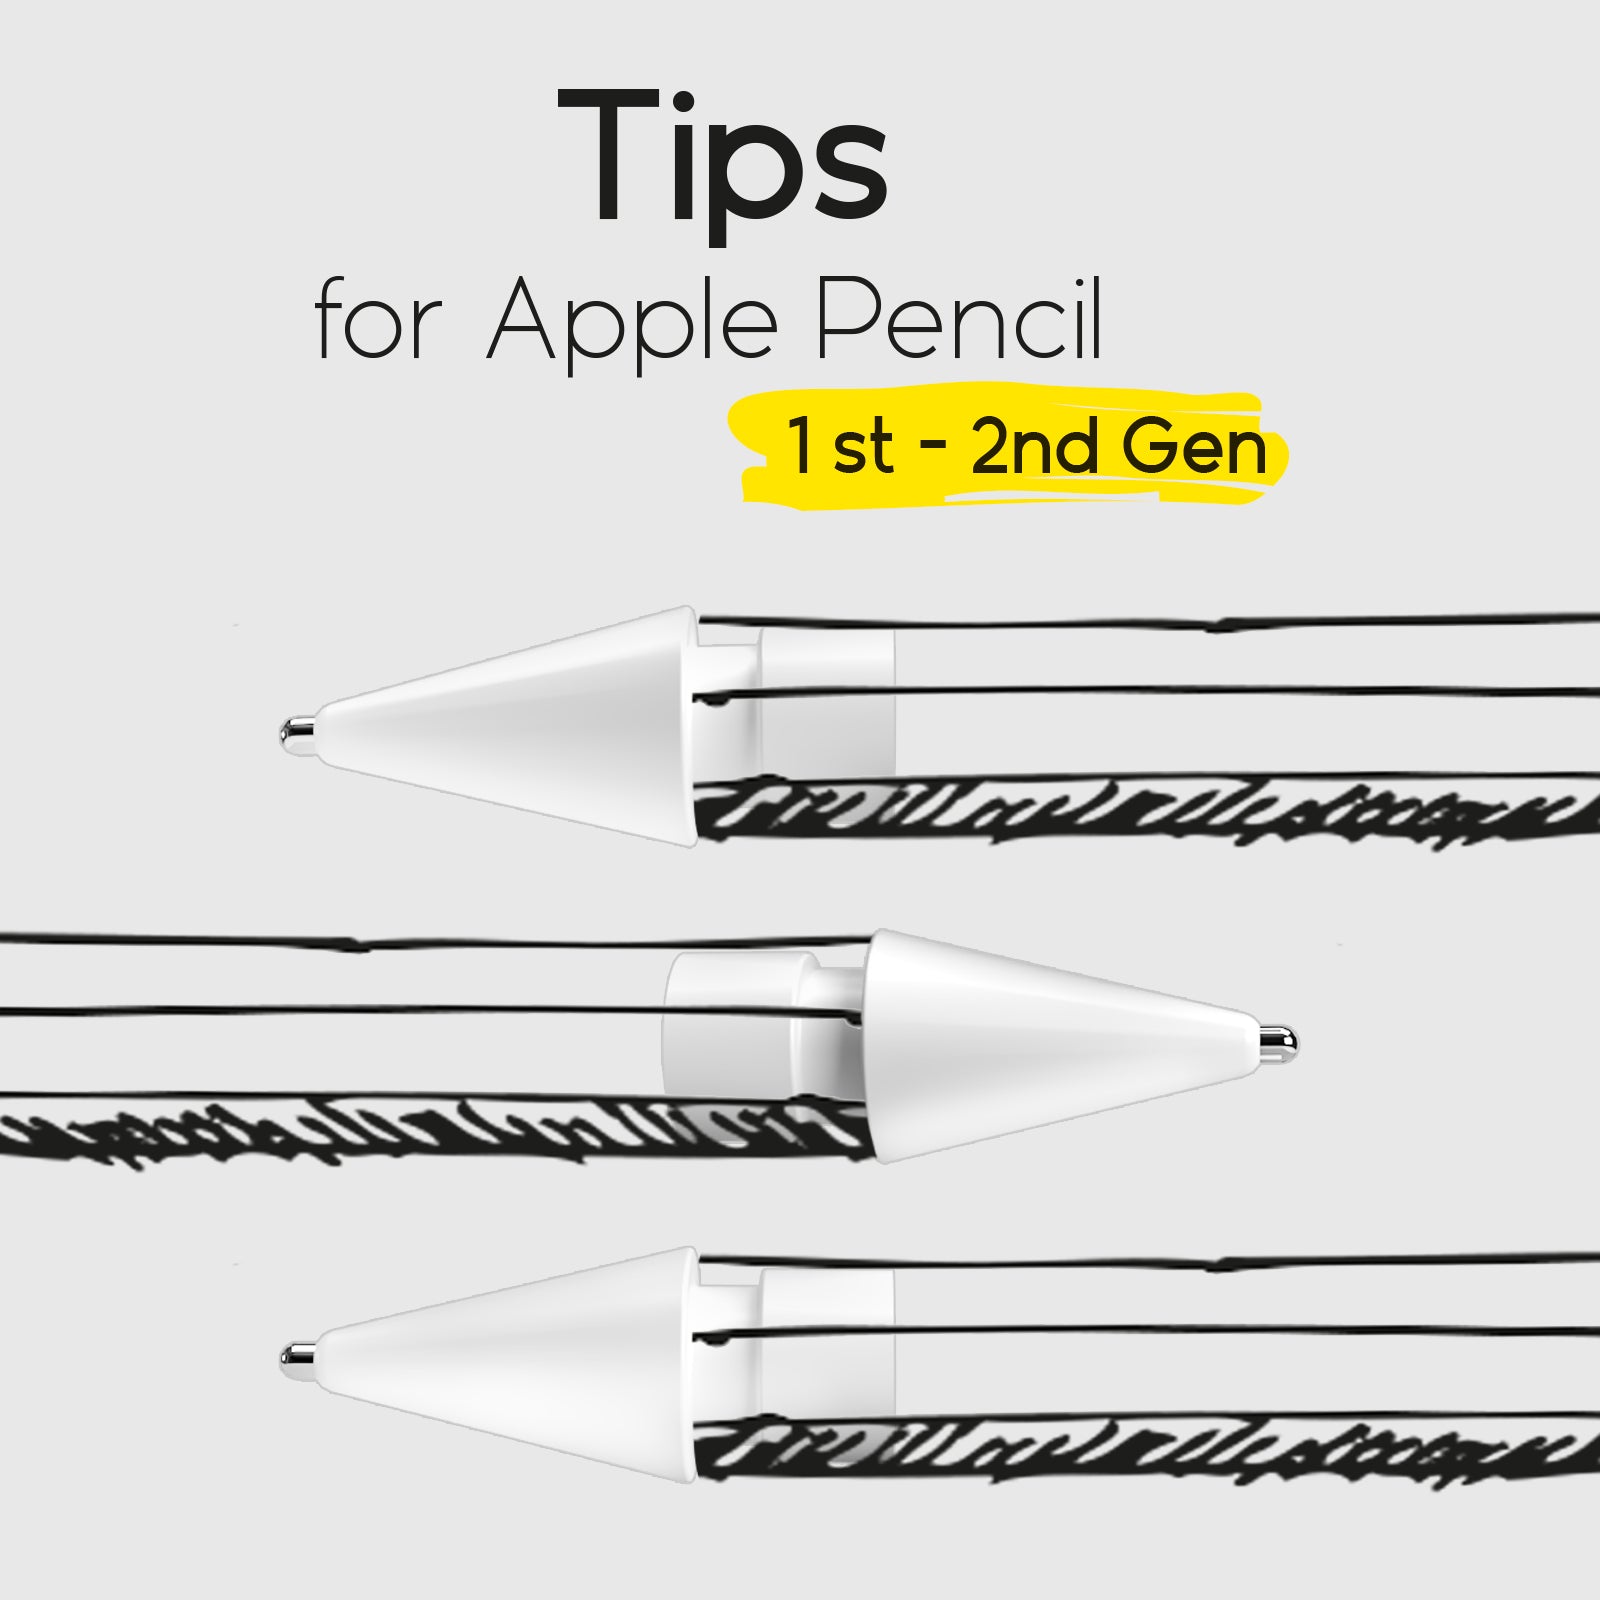 Replacement ABS tips for 1st and 2nd generation Apple Pencils